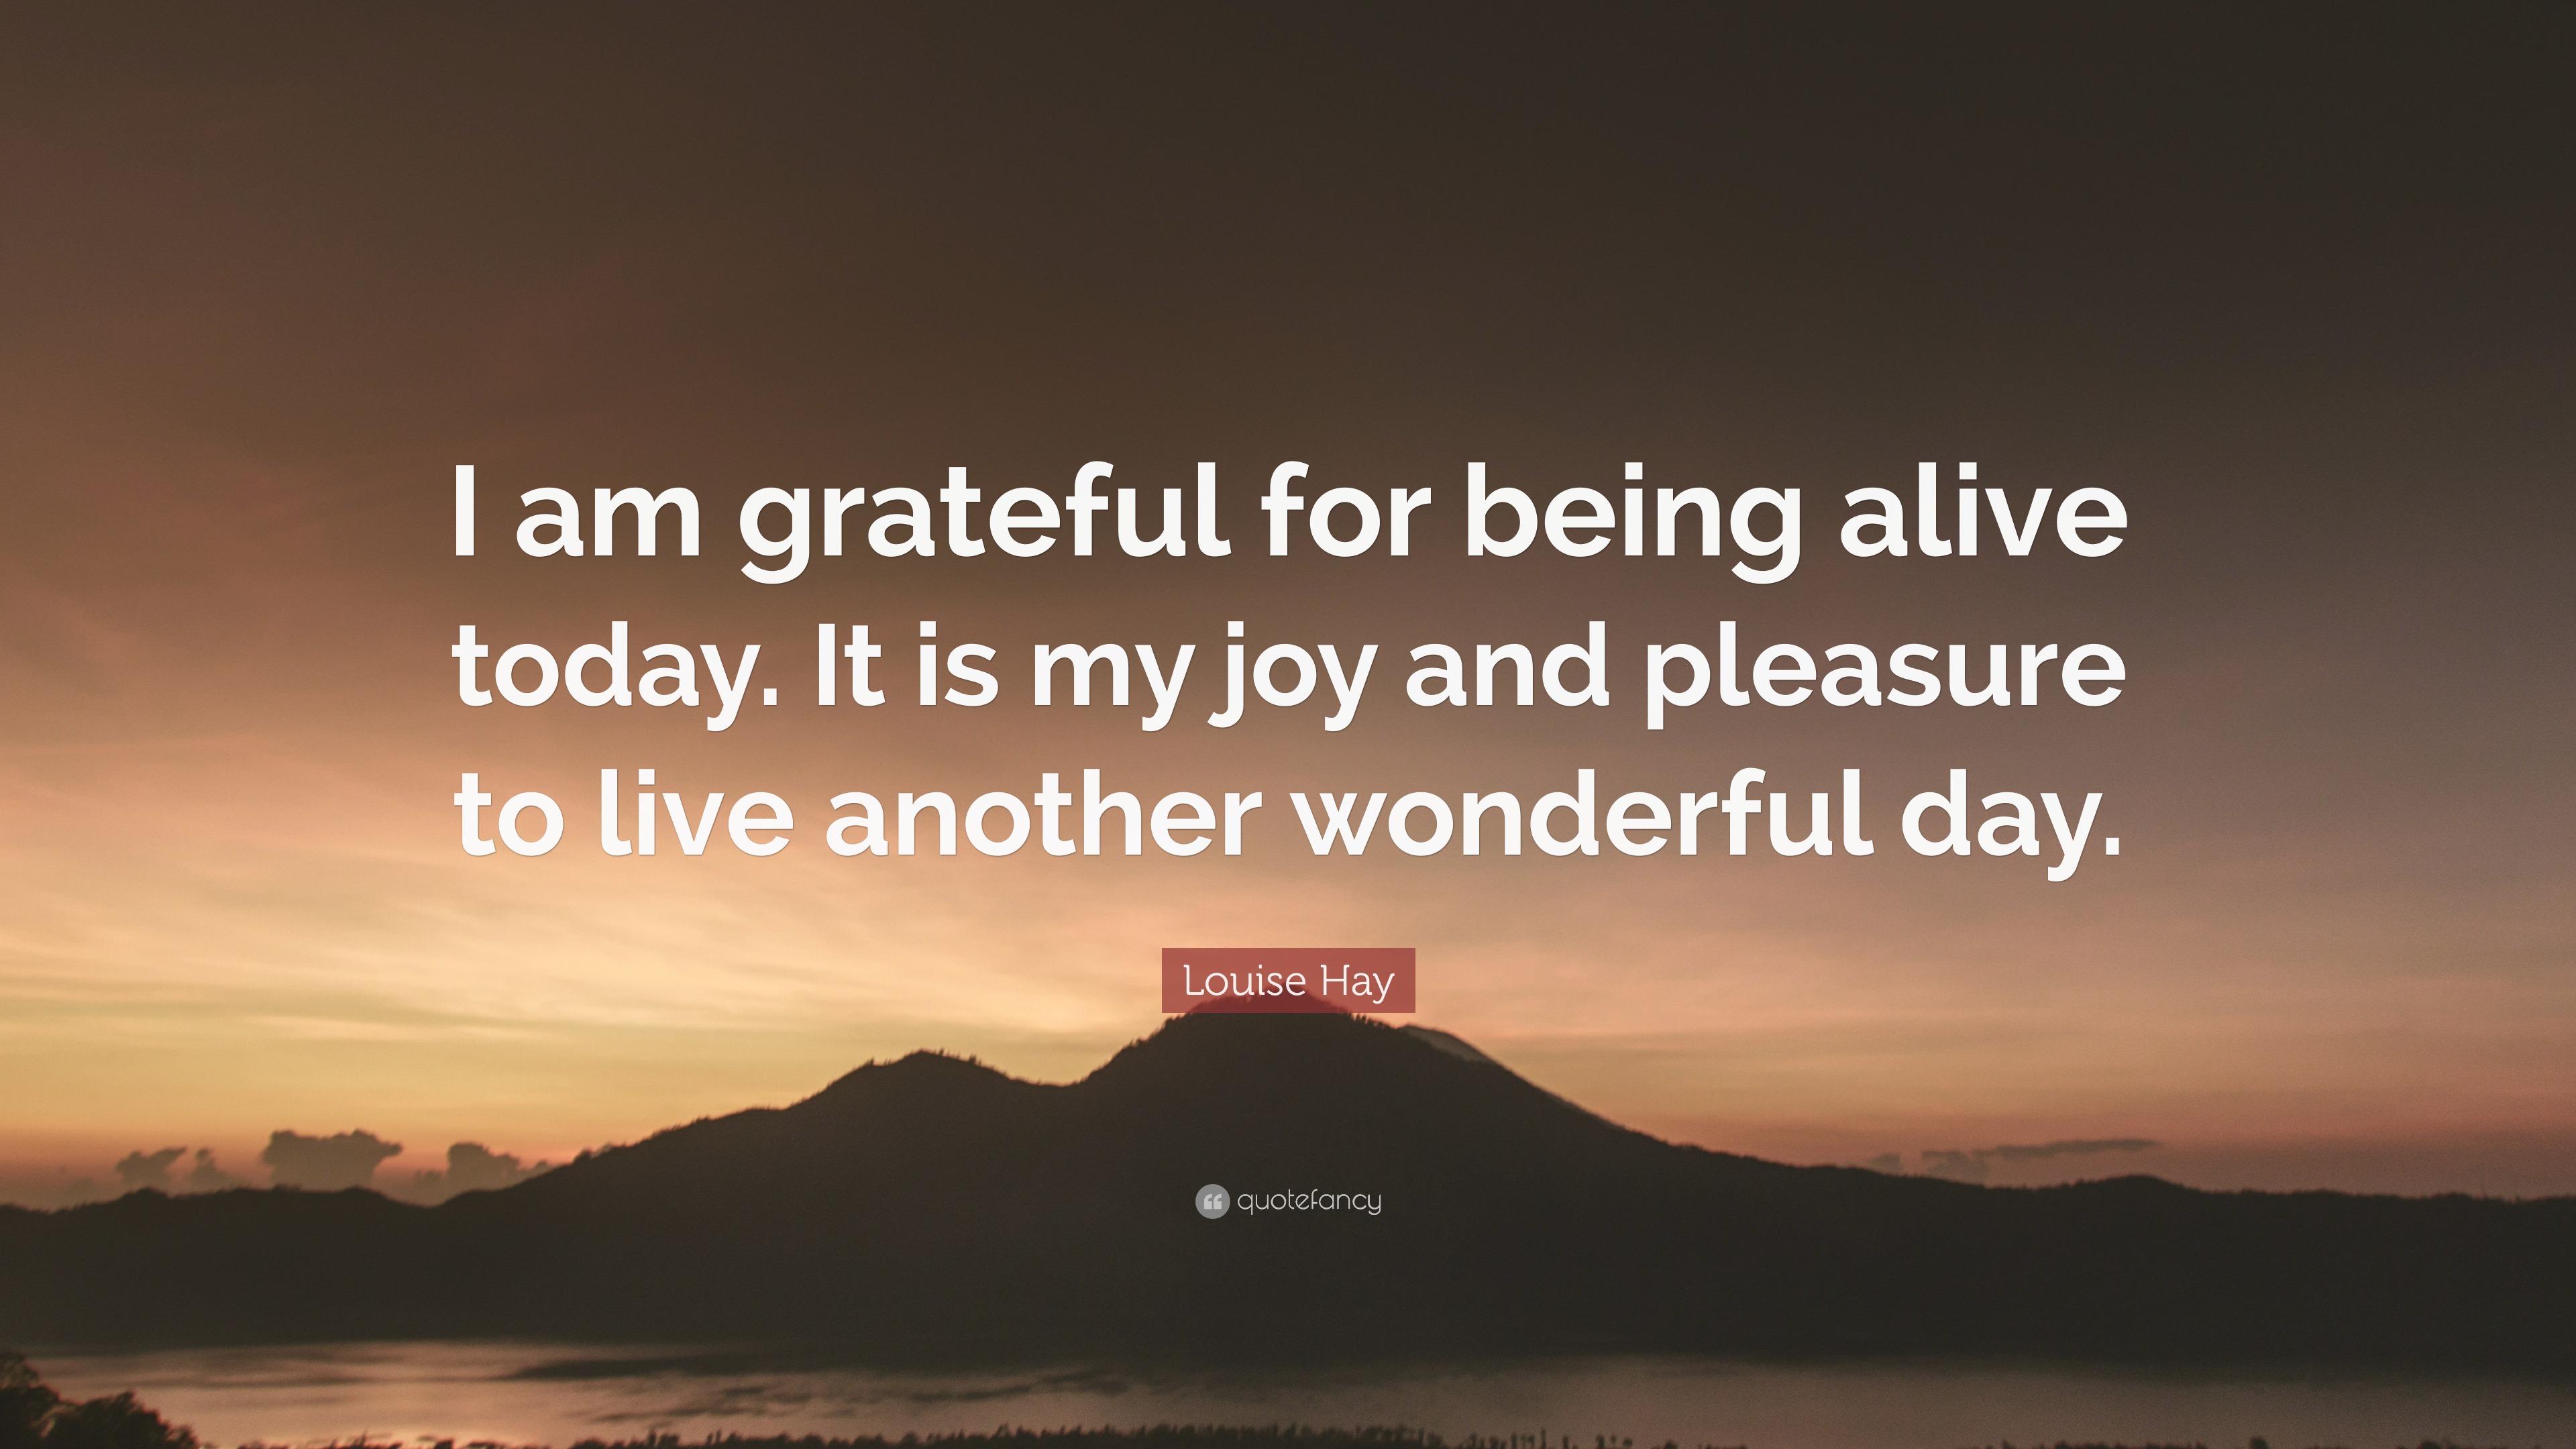 Louise Hay Quote I Am Grateful For Being Alive Today It Is My Joy And Pleasure To Live